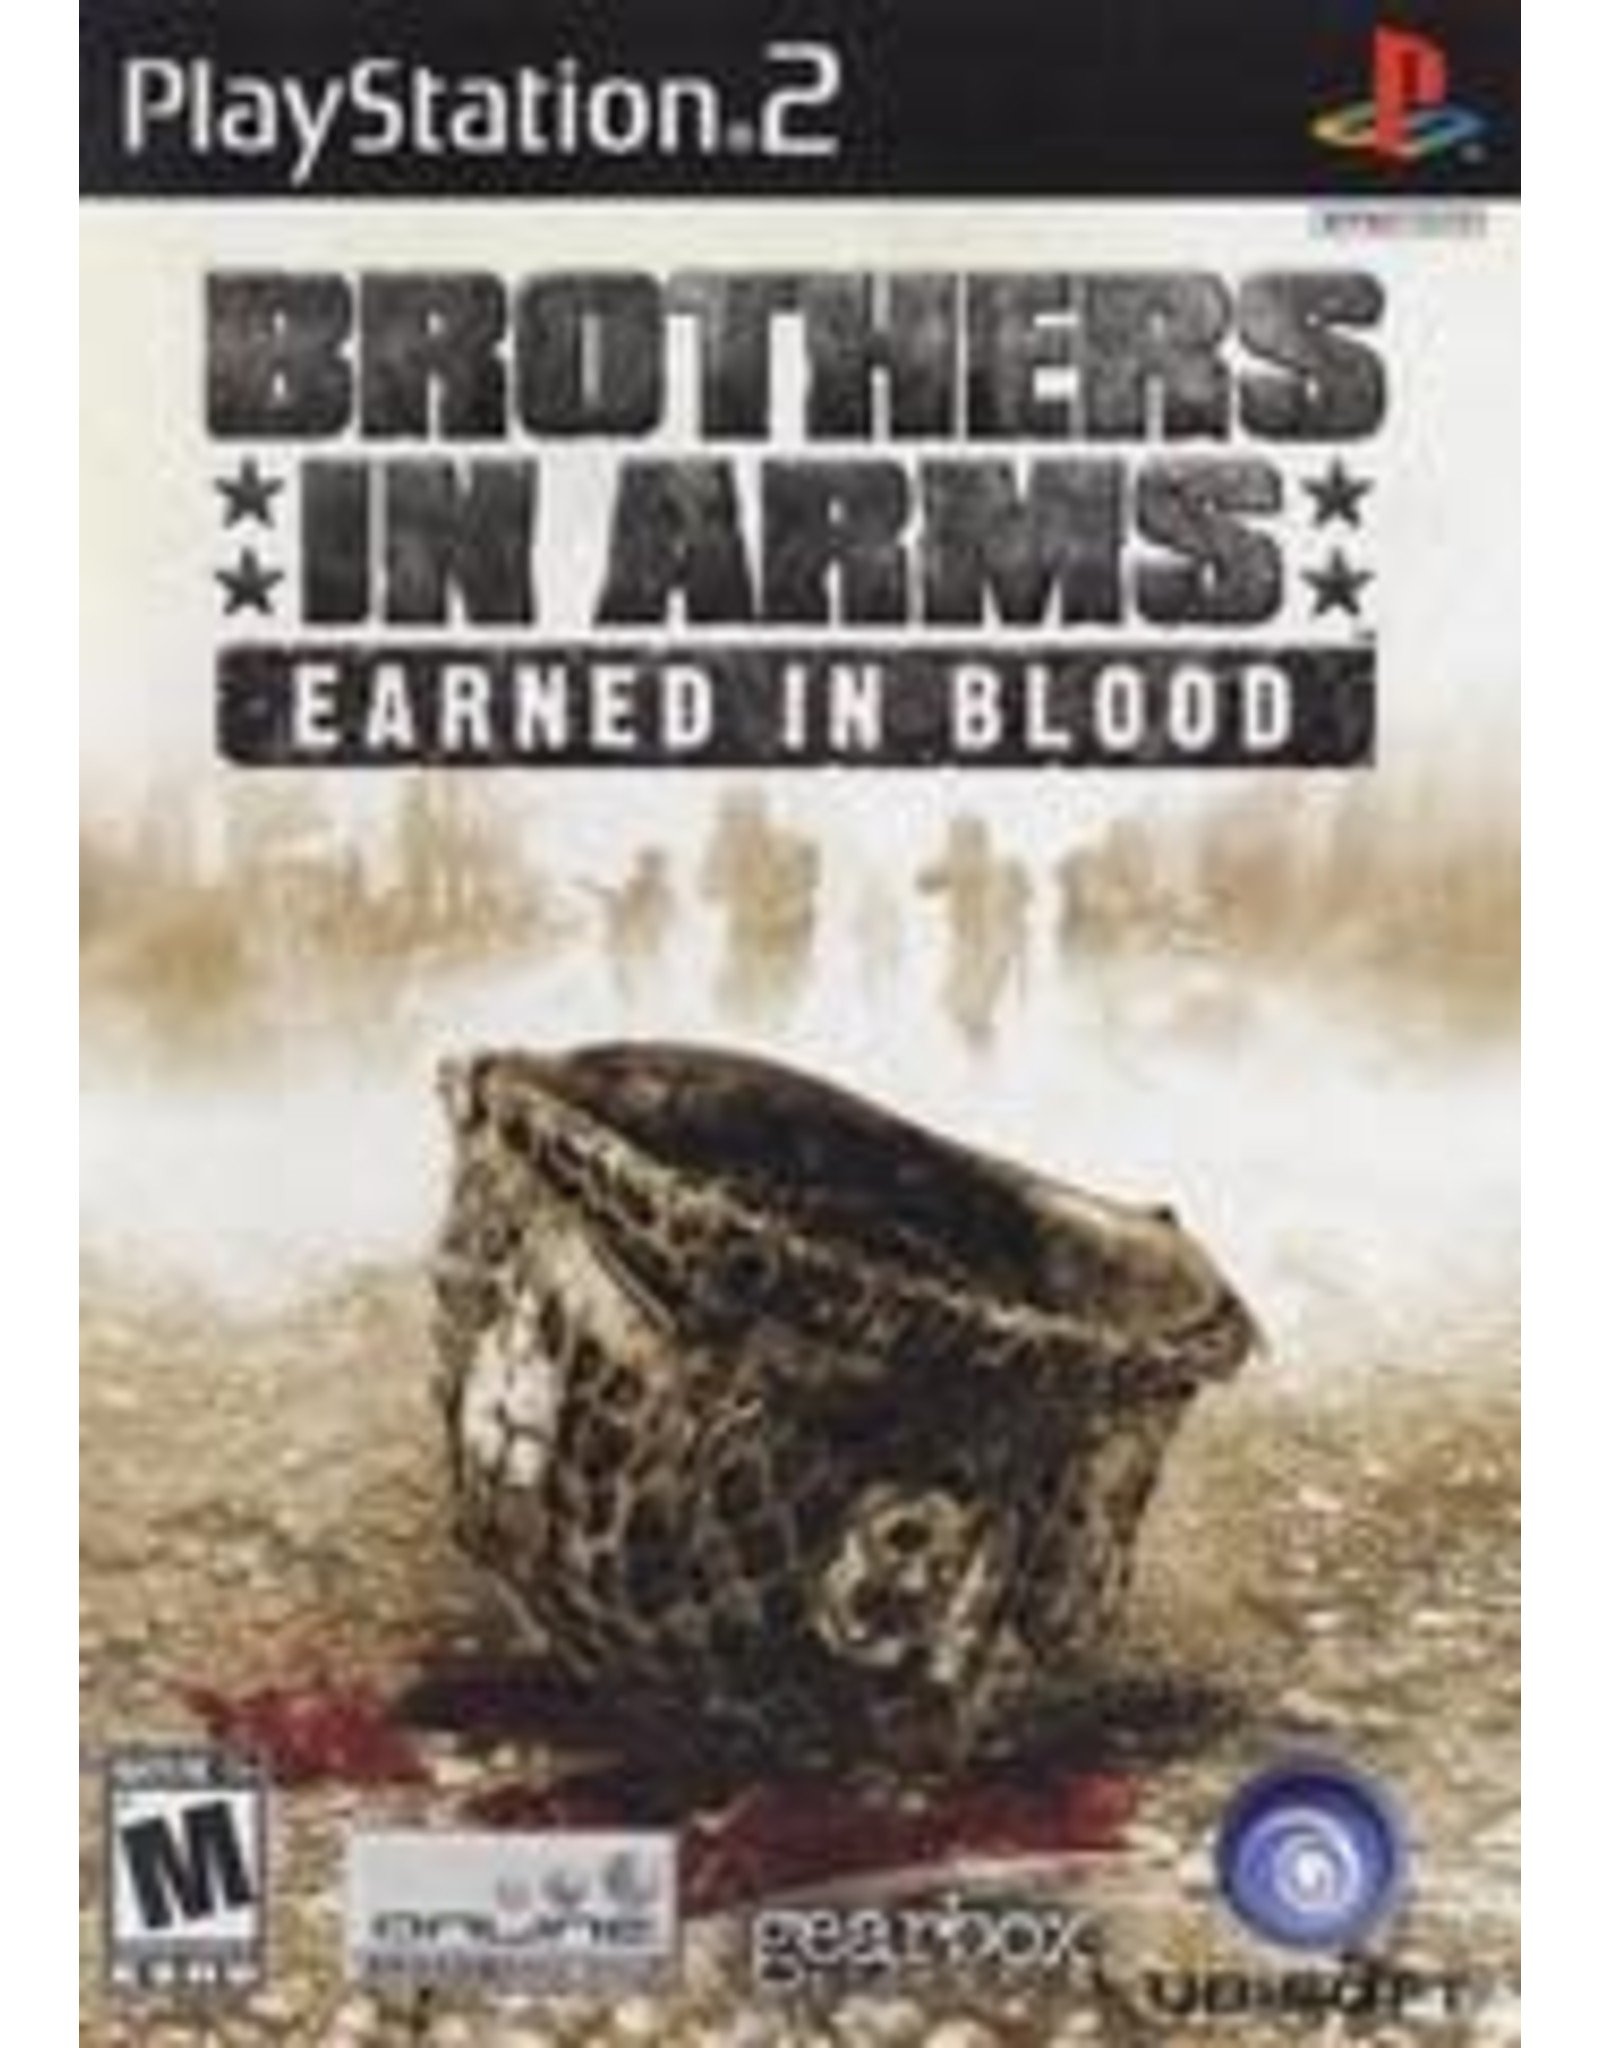 Playstation 2 Brothers in Arms Earned in Blood (CiB)